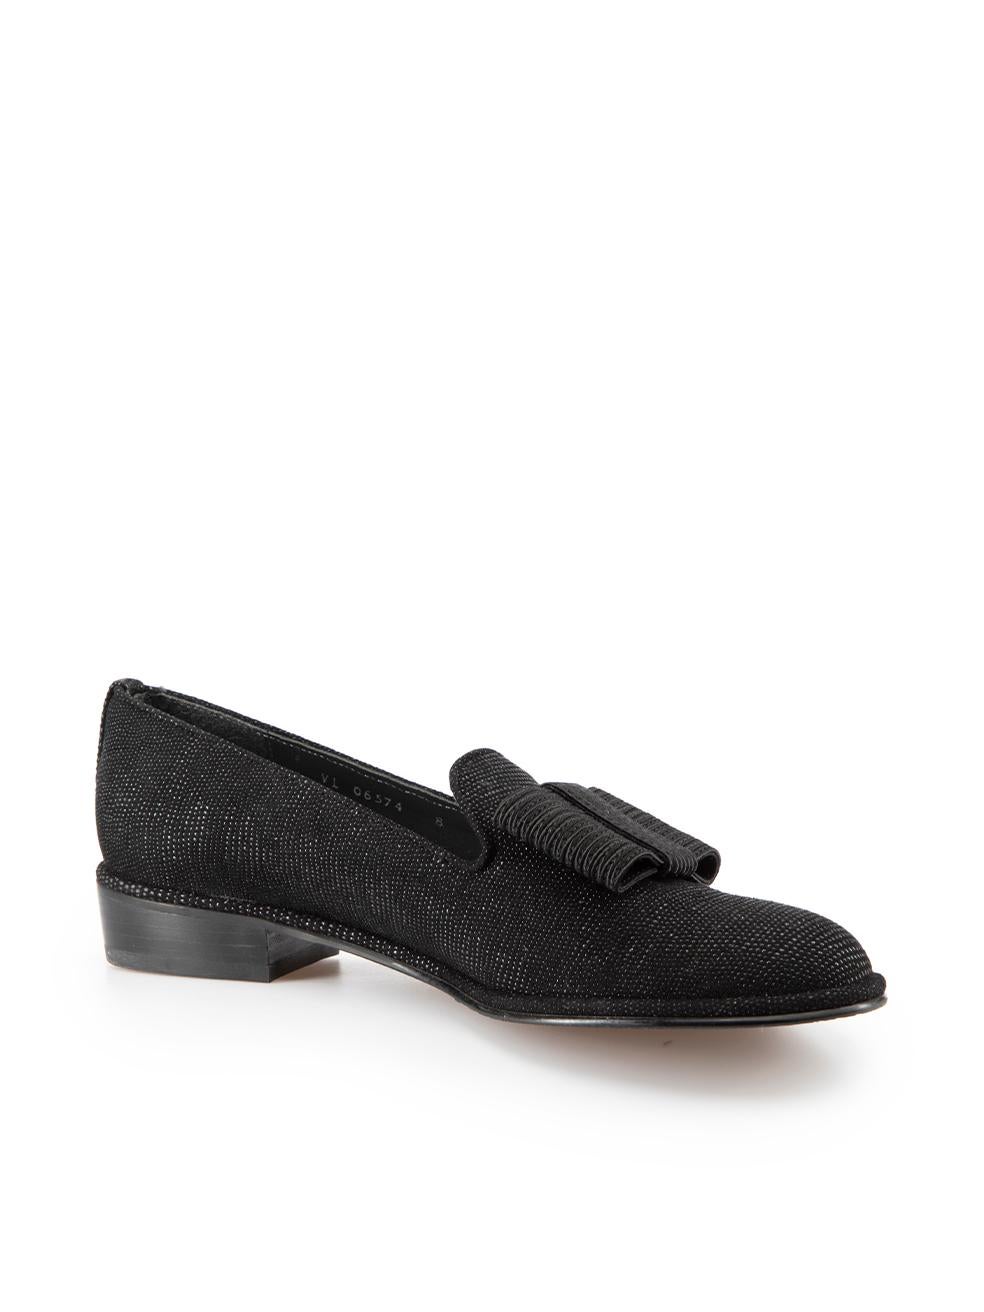 CONDITION is Very good. Hardly any visible wear to loafers is evident on this used Stuart Weitzman designer resale item. Shoebox included.

Details
Black
Suede
Loafers
Slip on
Almond toe
Low heel
Bow detail
Textured suede
  
Made in Spain
 